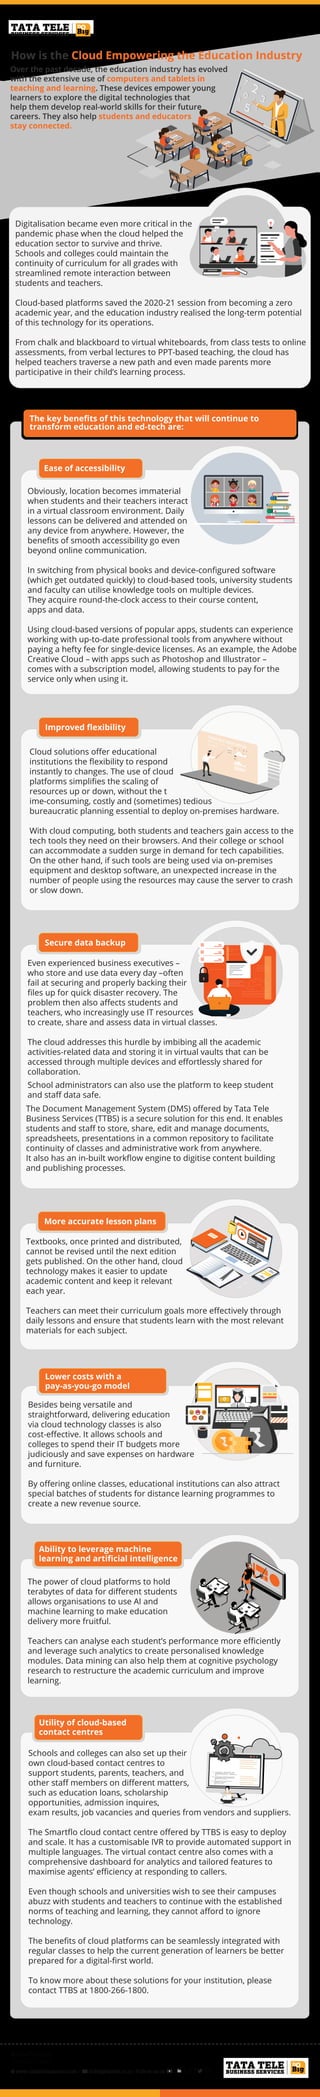 #TimeToDoBig
1800-266-1800
www.tatatelebusiness.com | dobig@tatatel.co.in | Follow us on
The key beneﬁts of this technology that will continue to
transform education and ed-tech are:
How is the Cloud Empowering the Education Industry
Over the past decade, the education industry has evolved
with the extensive use of computers and tablets in
teaching and learning. These devices empower young
learners to explore the digital technologies that
help them develop real-world skills for their future
careers. They also help students and educators
stay connected.
Digitalisation became even more critical in the
pandemic phase when the cloud helped the
education sector to survive and thrive.
Schools and colleges could maintain the
continuity of curriculum for all grades with
streamlined remote interaction between
students and teachers.
Cloud-based platforms saved the 2020-21 session from becoming a zero
academic year, and the education industry realised the long-term potential
of this technology for its operations.
From chalk and blackboard to virtual whiteboards, from class tests to online
assessments, from verbal lectures to PPT-based teaching, the cloud has
helped teachers traverse a new path and even made parents more
participative in their child’s learning process.
Ease of accessibility
Improved ﬂexibility
Secure data backup
More accurate lesson plans
Lower costs with a
pay-as-you-go model
Ease of accessibility
Obviously, location becomes immaterial
when students and their teachers interact
in a virtual classroom environment. Daily
lessons can be delivered and attended on
any device from anywhere. However, the
beneﬁts of smooth accessibility go even
beyond online communication.
In switching from physical books and device-conﬁgured software
(which get outdated quickly) to cloud-based tools, university students
and faculty can utilise knowledge tools on multiple devices.
They acquire round-the-clock access to their course content,
apps and data.
Using cloud-based versions of popular apps, students can experience
working with up-to-date professional tools from anywhere without
paying a hefty fee for single-device licenses. As an example, the Adobe
Creative Cloud – with apps such as Photoshop and Illustrator –
comes with a subscription model, allowing students to pay for the
service only when using it.
Cloud solutions oﬀer educational
institutions the ﬂexibility to respond
instantly to changes. The use of cloud
platforms simpliﬁes the scaling of
resources up or down, without the t
ime-consuming, costly and (sometimes) tedious
bureaucratic planning essential to deploy on-premises hardware.
With cloud computing, both students and teachers gain access to the
tech tools they need on their browsers. And their college or school
can accommodate a sudden surge in demand for tech capabilities.
On the other hand, if such tools are being used via on-premises
equipment and desktop software, an unexpected increase in the
number of people using the resources may cause the server to crash
or slow down.
Even experienced business executives –
who store and use data every day –often
fail at securing and properly backing their
ﬁles up for quick disaster recovery. The
problem then also aﬀects students and
teachers, who increasingly use IT resources
to create, share and assess data in virtual classes.
The cloud addresses this hurdle by imbibing all the academic
activities-related data and storing it in virtual vaults that can be
accessed through multiple devices and eﬀortlessly shared for
collaboration.
Textbooks, once printed and distributed,
cannot be revised until the next edition
gets published. On the other hand, cloud
technology makes it easier to update
academic content and keep it relevant
each year.
Teachers can meet their curriculum goals more eﬀectively through
daily lessons and ensure that students learn with the most relevant
materials for each subject.
Besides being versatile and
straightforward, delivering education
via cloud technology classes is also
cost-eﬀective. It allows schools and
colleges to spend their IT budgets more
judiciously and save expenses on hardware
and furniture.
By oﬀering online classes, educational institutions can also attract
special batches of students for distance learning programmes to
create a new revenue source.
The power of cloud platforms to hold
terabytes of data for diﬀerent students
allows organisations to use AI and
machine learning to make education
delivery more fruitful.
Teachers can analyse each student’s performance more eﬃciently
and leverage such analytics to create personalised knowledge
modules. Data mining can also help them at cognitive psychology
research to restructure the academic curriculum and improve
learning.
School administrators can also use the platform to keep student
and staﬀ data safe.
The Document Management System (DMS) oﬀered by Tata Tele
Business Services (TTBS) is a secure solution for this end. It enables
students and staﬀ to store, share, edit and manage documents,
spreadsheets, presentations in a common repository to facilitate
continuity of classes and administrative work from anywhere.
It also has an in-built workﬂow engine to digitise content building
and publishing processes.
Ability to leverage machine
learning and artiﬁcial intelligence
Utility of cloud-based
contact centres
Schools and colleges can also set up their
own cloud-based contact centres to
support students, parents, teachers, and
other staﬀ members on diﬀerent matters,
such as education loans, scholarship
opportunities, admission inquires,
exam results, job vacancies and queries from vendors and suppliers.
The Smartﬂo cloud contact centre oﬀered by TTBS is easy to deploy
and scale. It has a customisable IVR to provide automated support in
multiple languages. The virtual contact centre also comes with a
comprehensive dashboard for analytics and tailored features to
maximise agents’ eﬃciency at responding to callers.
Even though schools and universities wish to see their campuses
abuzz with students and teachers to continue with the established
norms of teaching and learning, they cannot aﬀord to ignore
technology.
The beneﬁts of cloud platforms can be seamlessly integrated with
regular classes to help the current generation of learners be better
prepared for a digital-ﬁrst world.
To know more about these solutions for your institution, please
contact TTBS at 1800-266-1800.
 